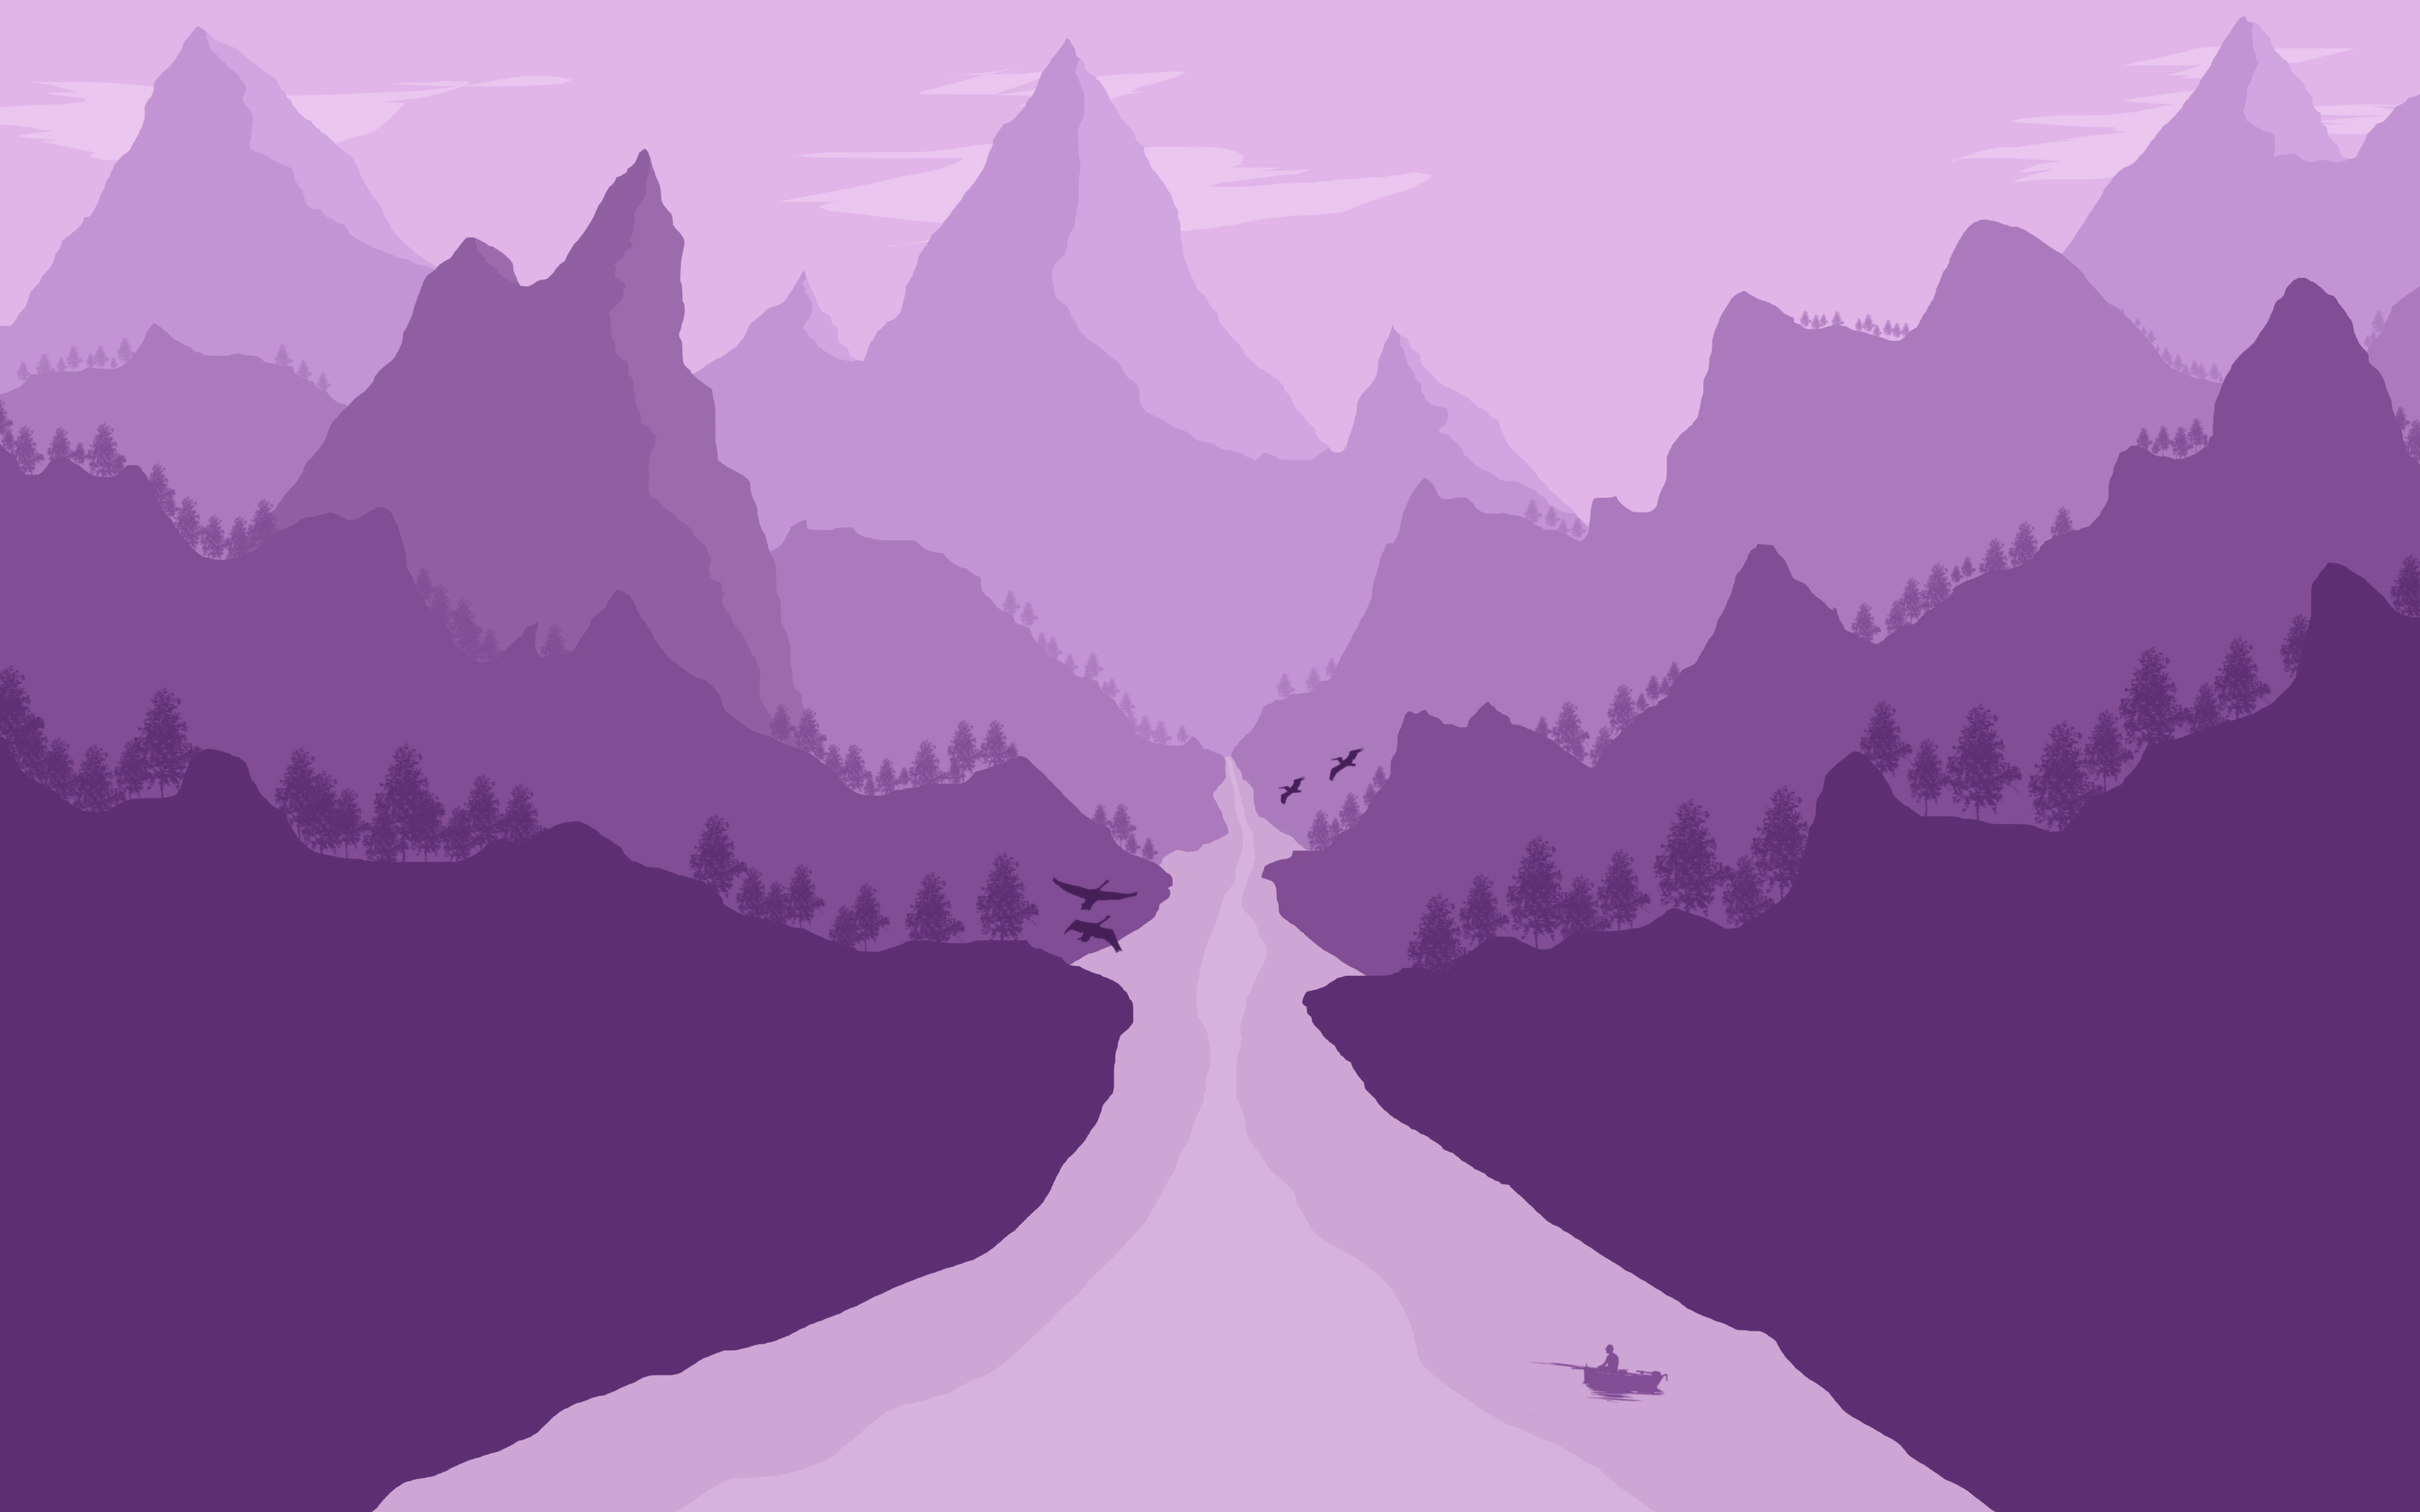 Download wallpaper 4k, mountains, river, forest, purple landscape, minimal for desktop with resolution 3840x2400. High Quality HD picture wallpaper